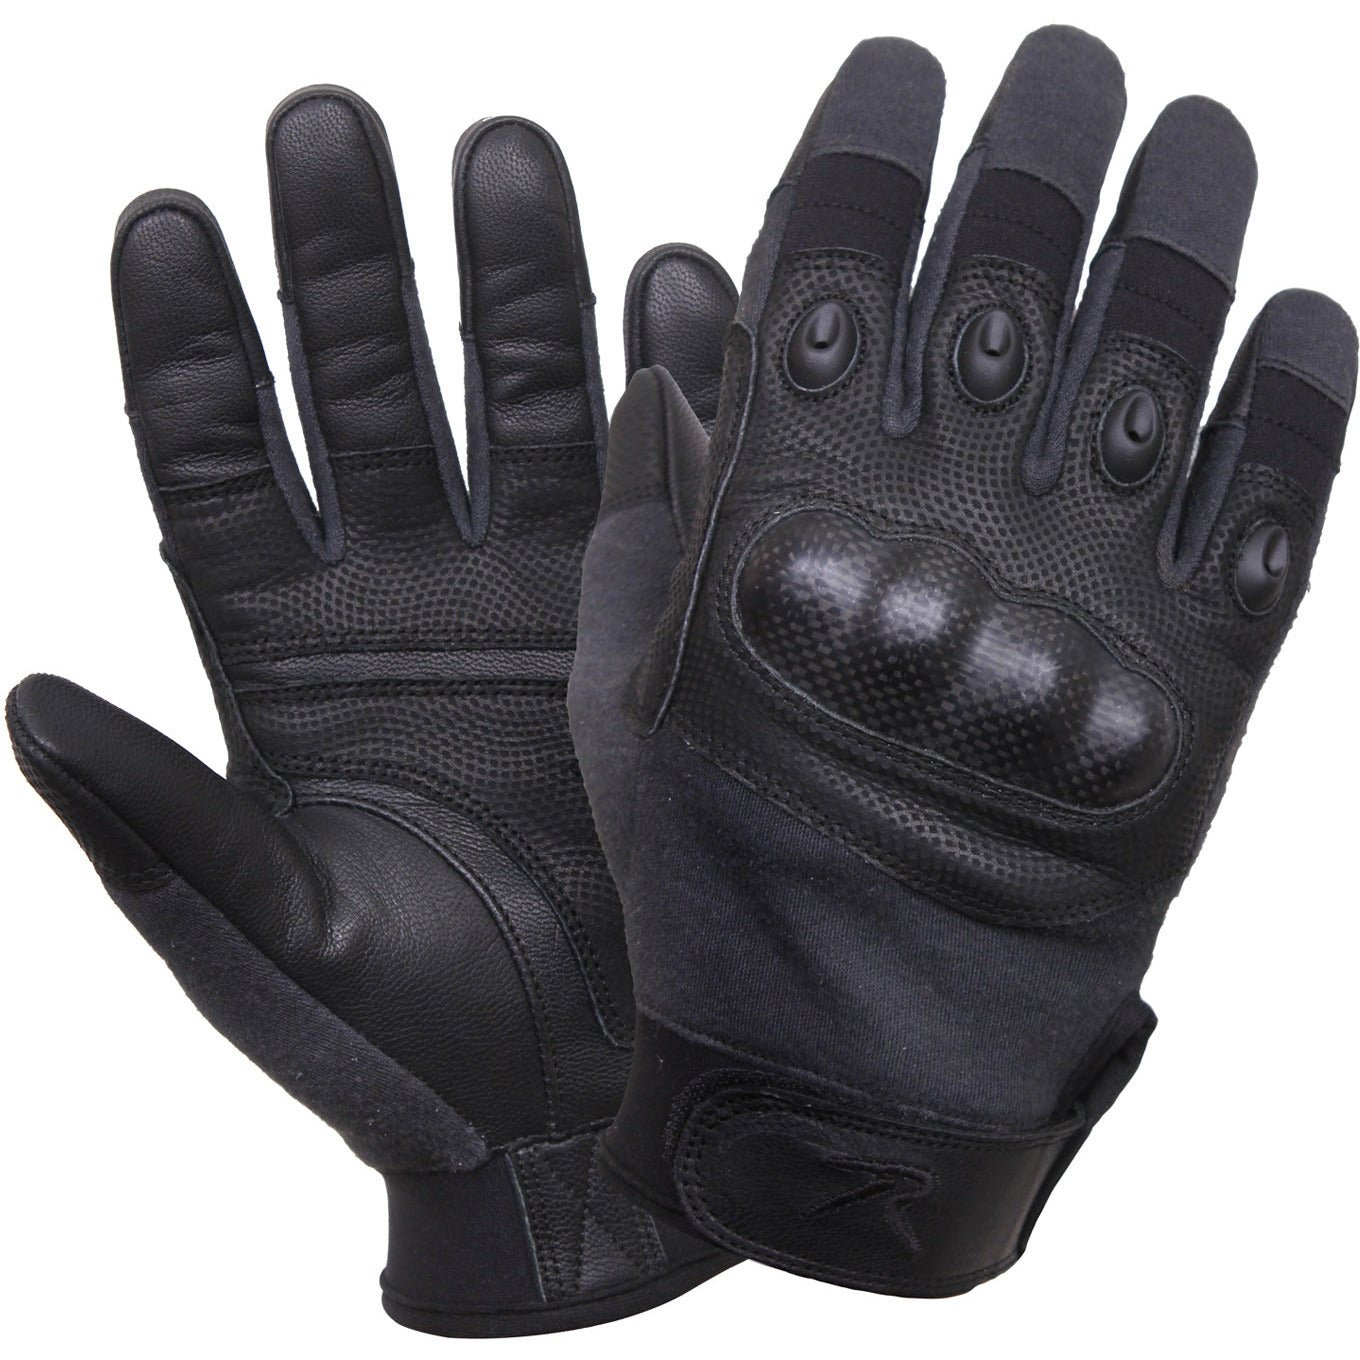 Hard Knuckle Full Leather Carbon Fiber Fire and Cut Resistant Gloves, Tactical Glide